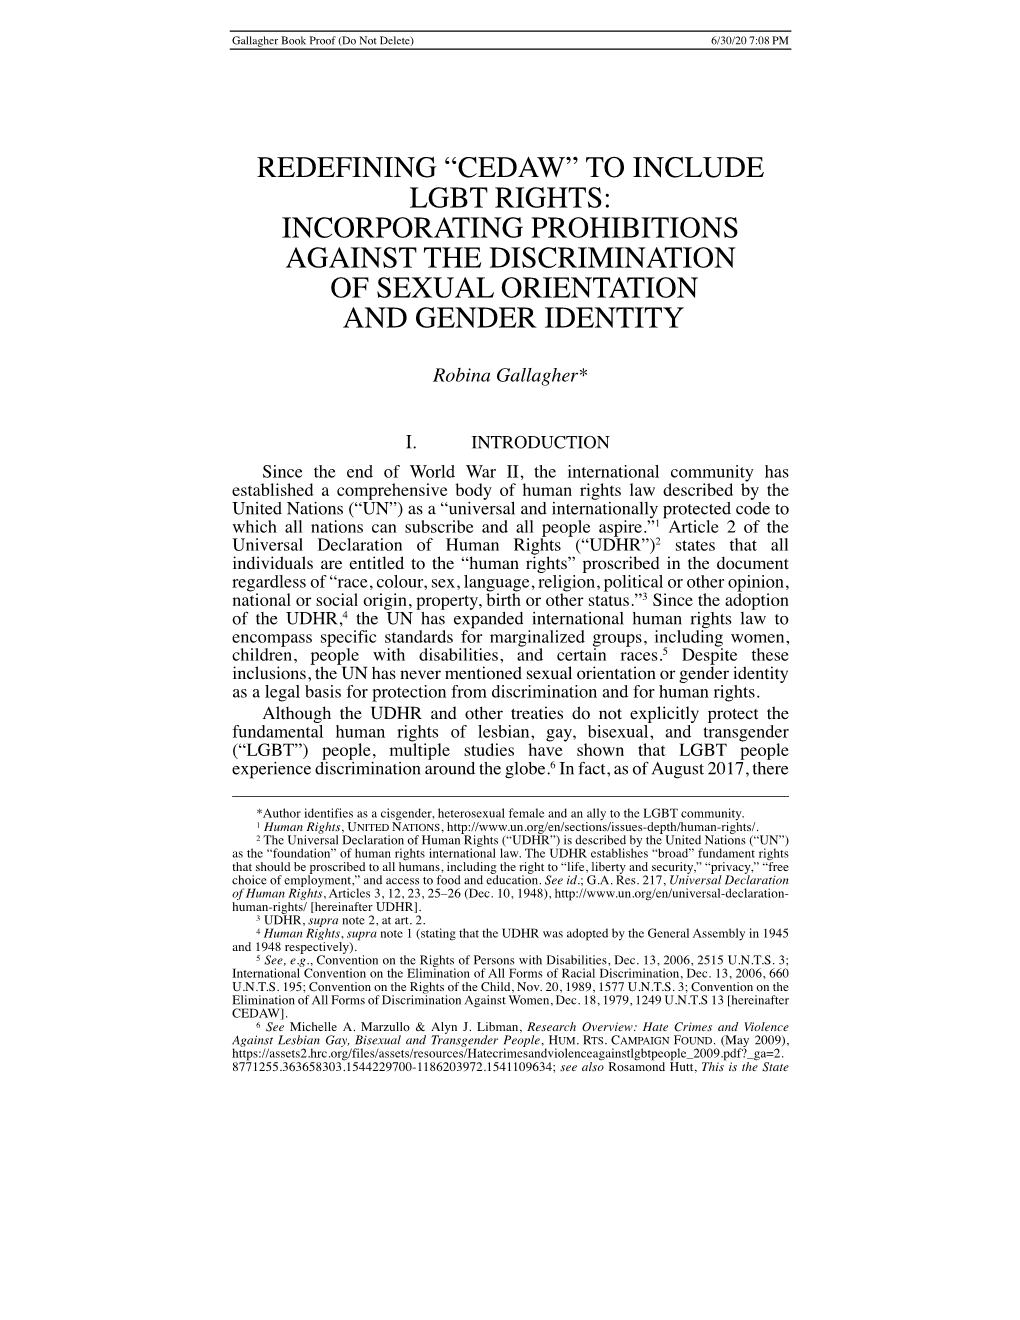 Cedaw” to Include Lgbt Rights: Incorporating Prohibitions Against the Discrimination of Sexual Orientation and Gender Identity